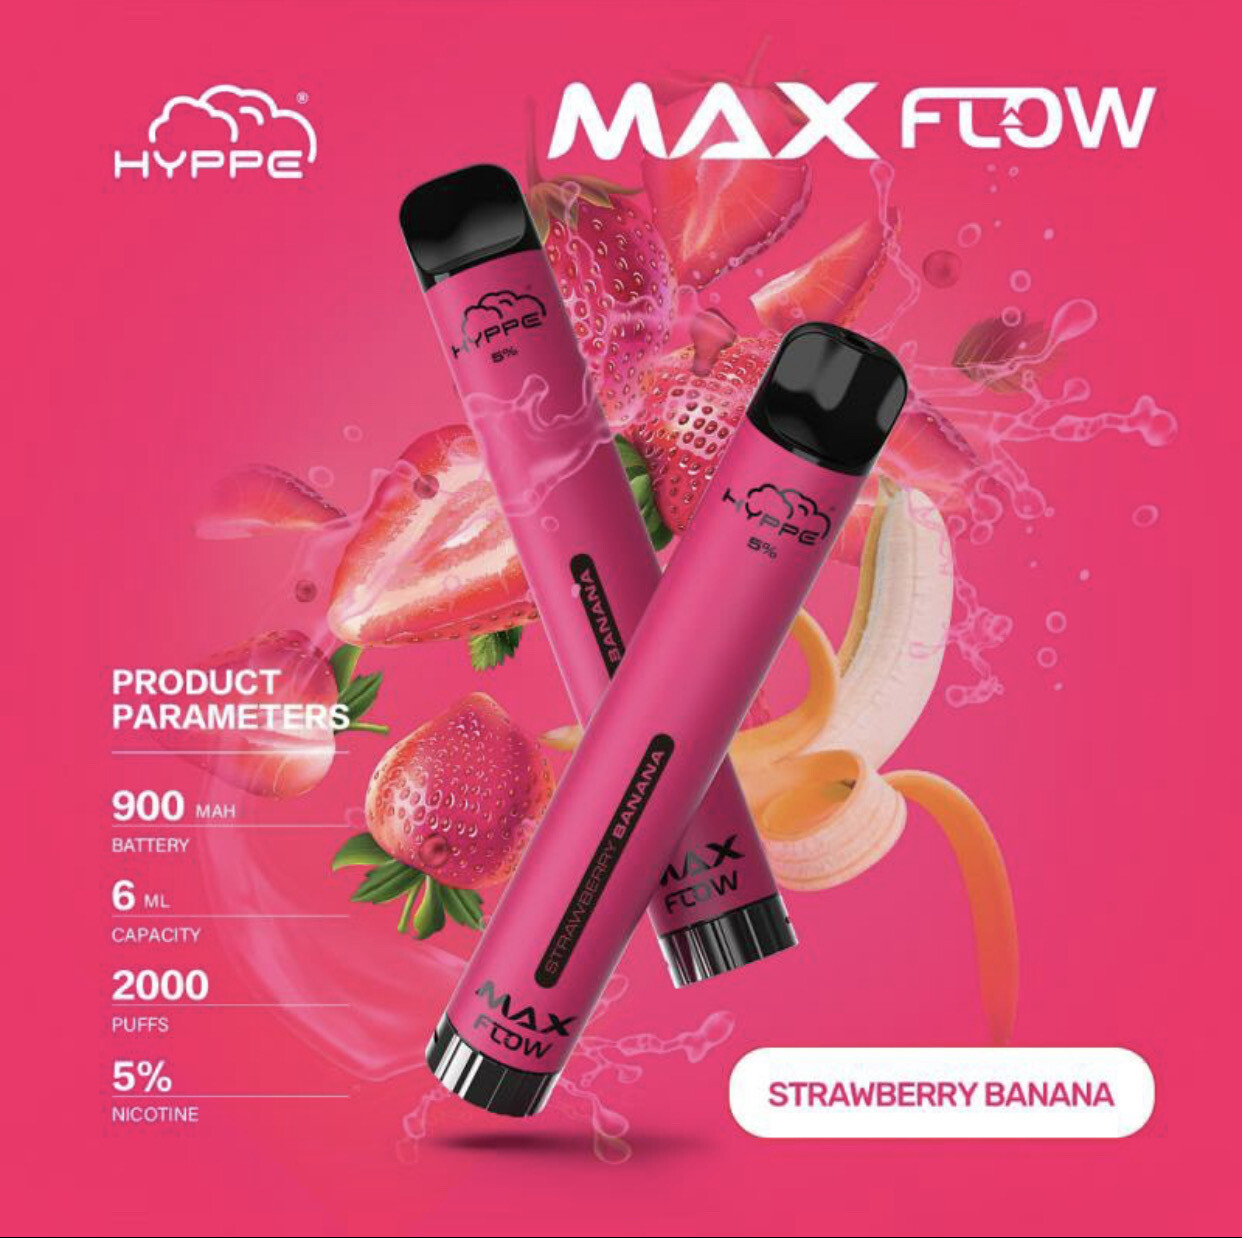 Hyppe Max Flow 5% Strawberry Banana